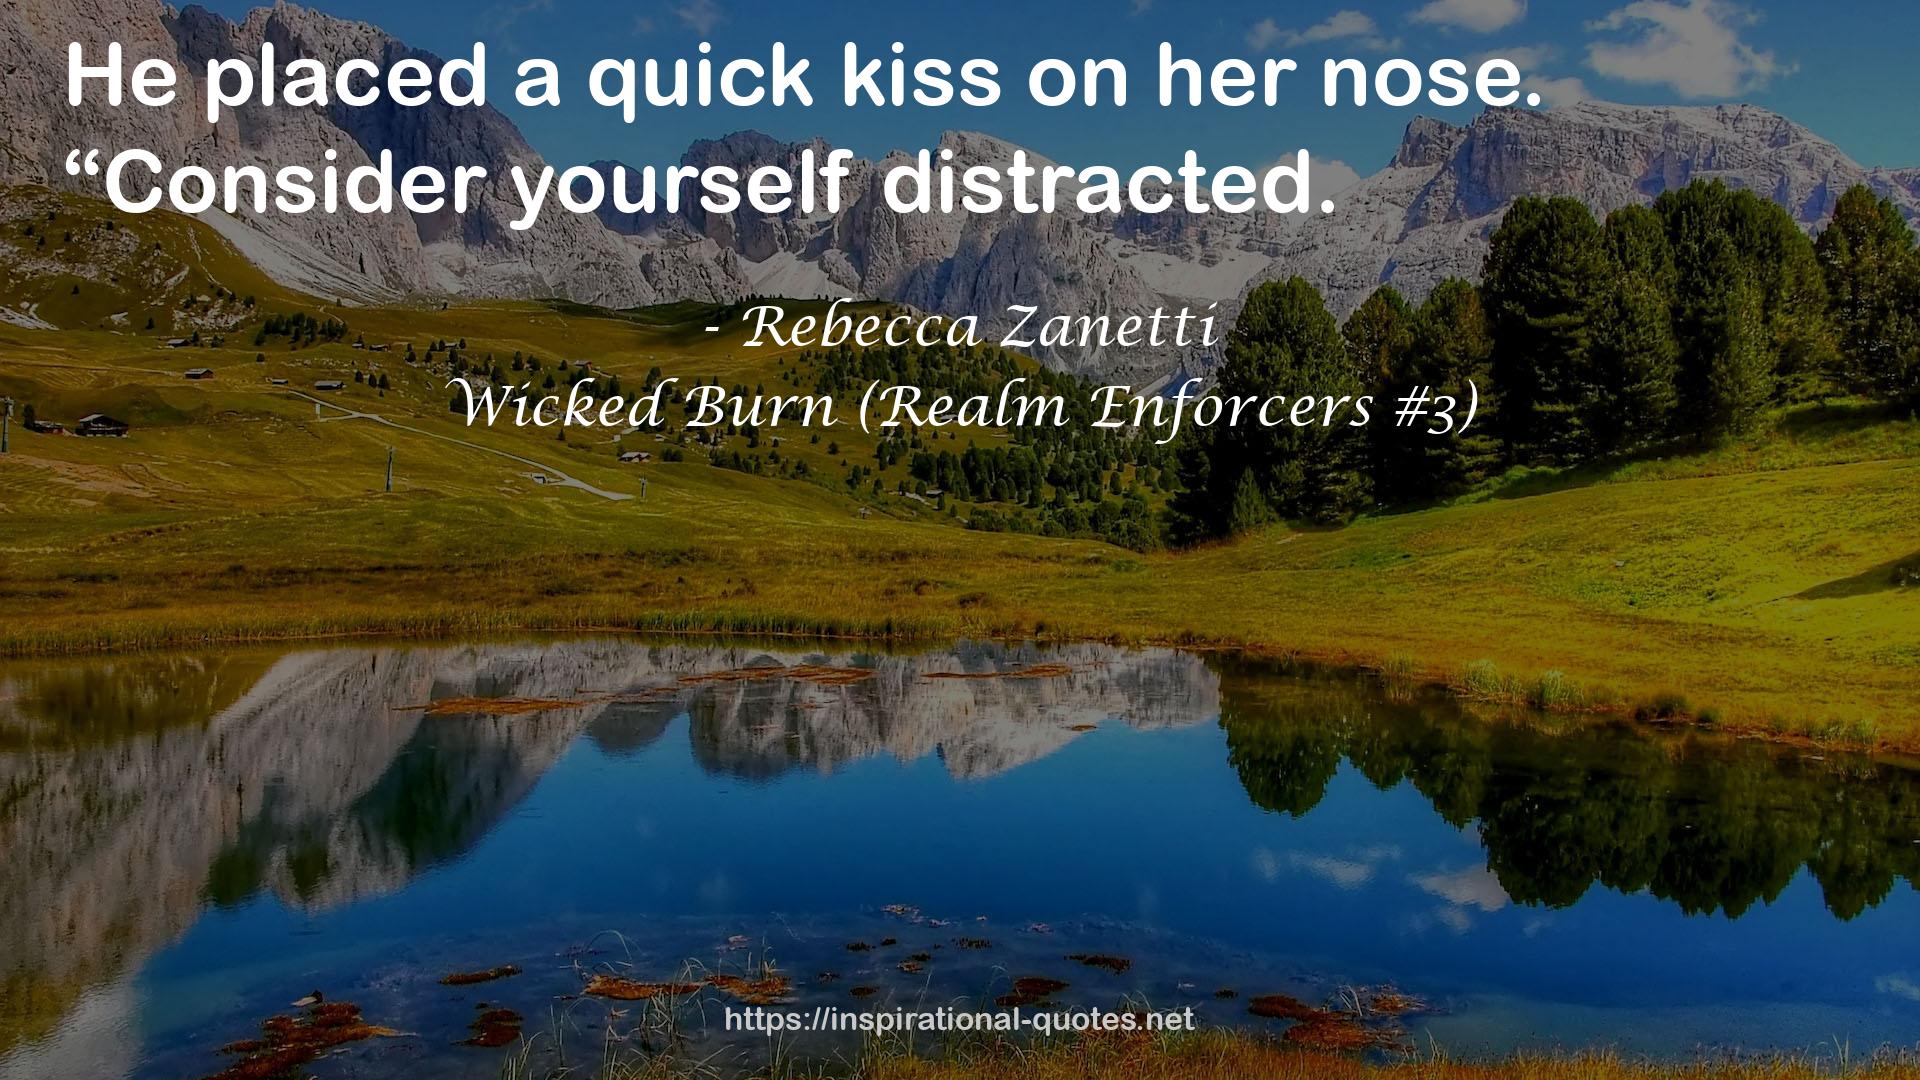 Wicked Burn (Realm Enforcers #3) QUOTES